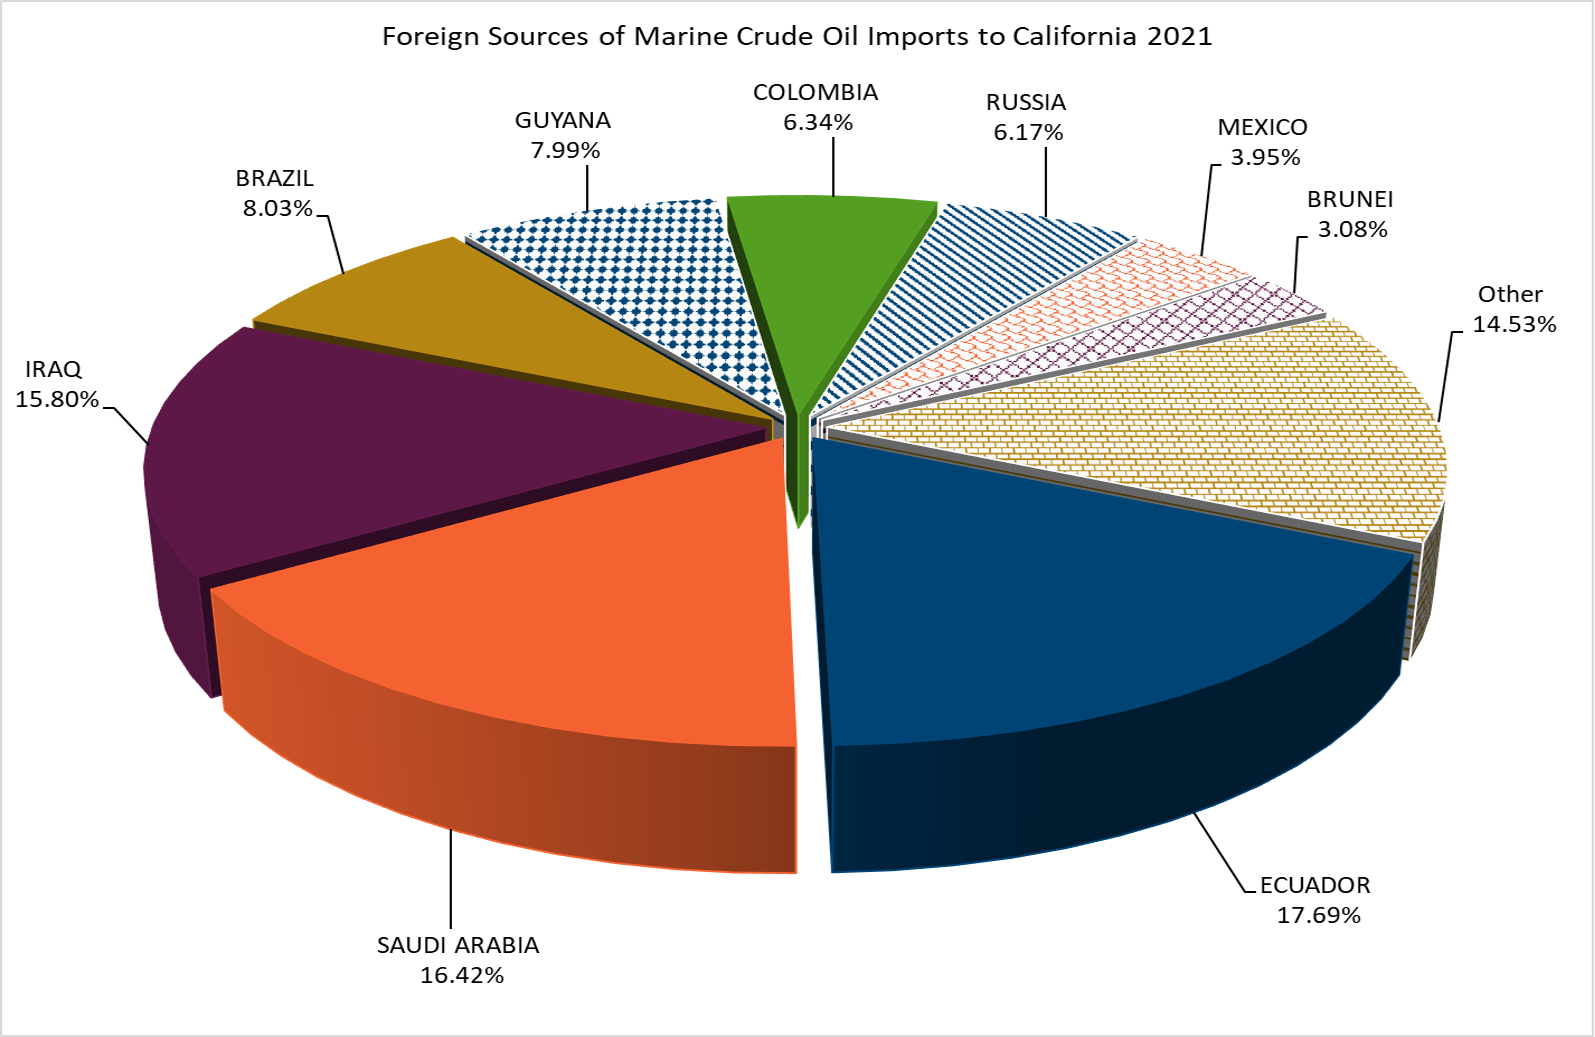 Foreign Sources of Crude Oil Imports to California 2021